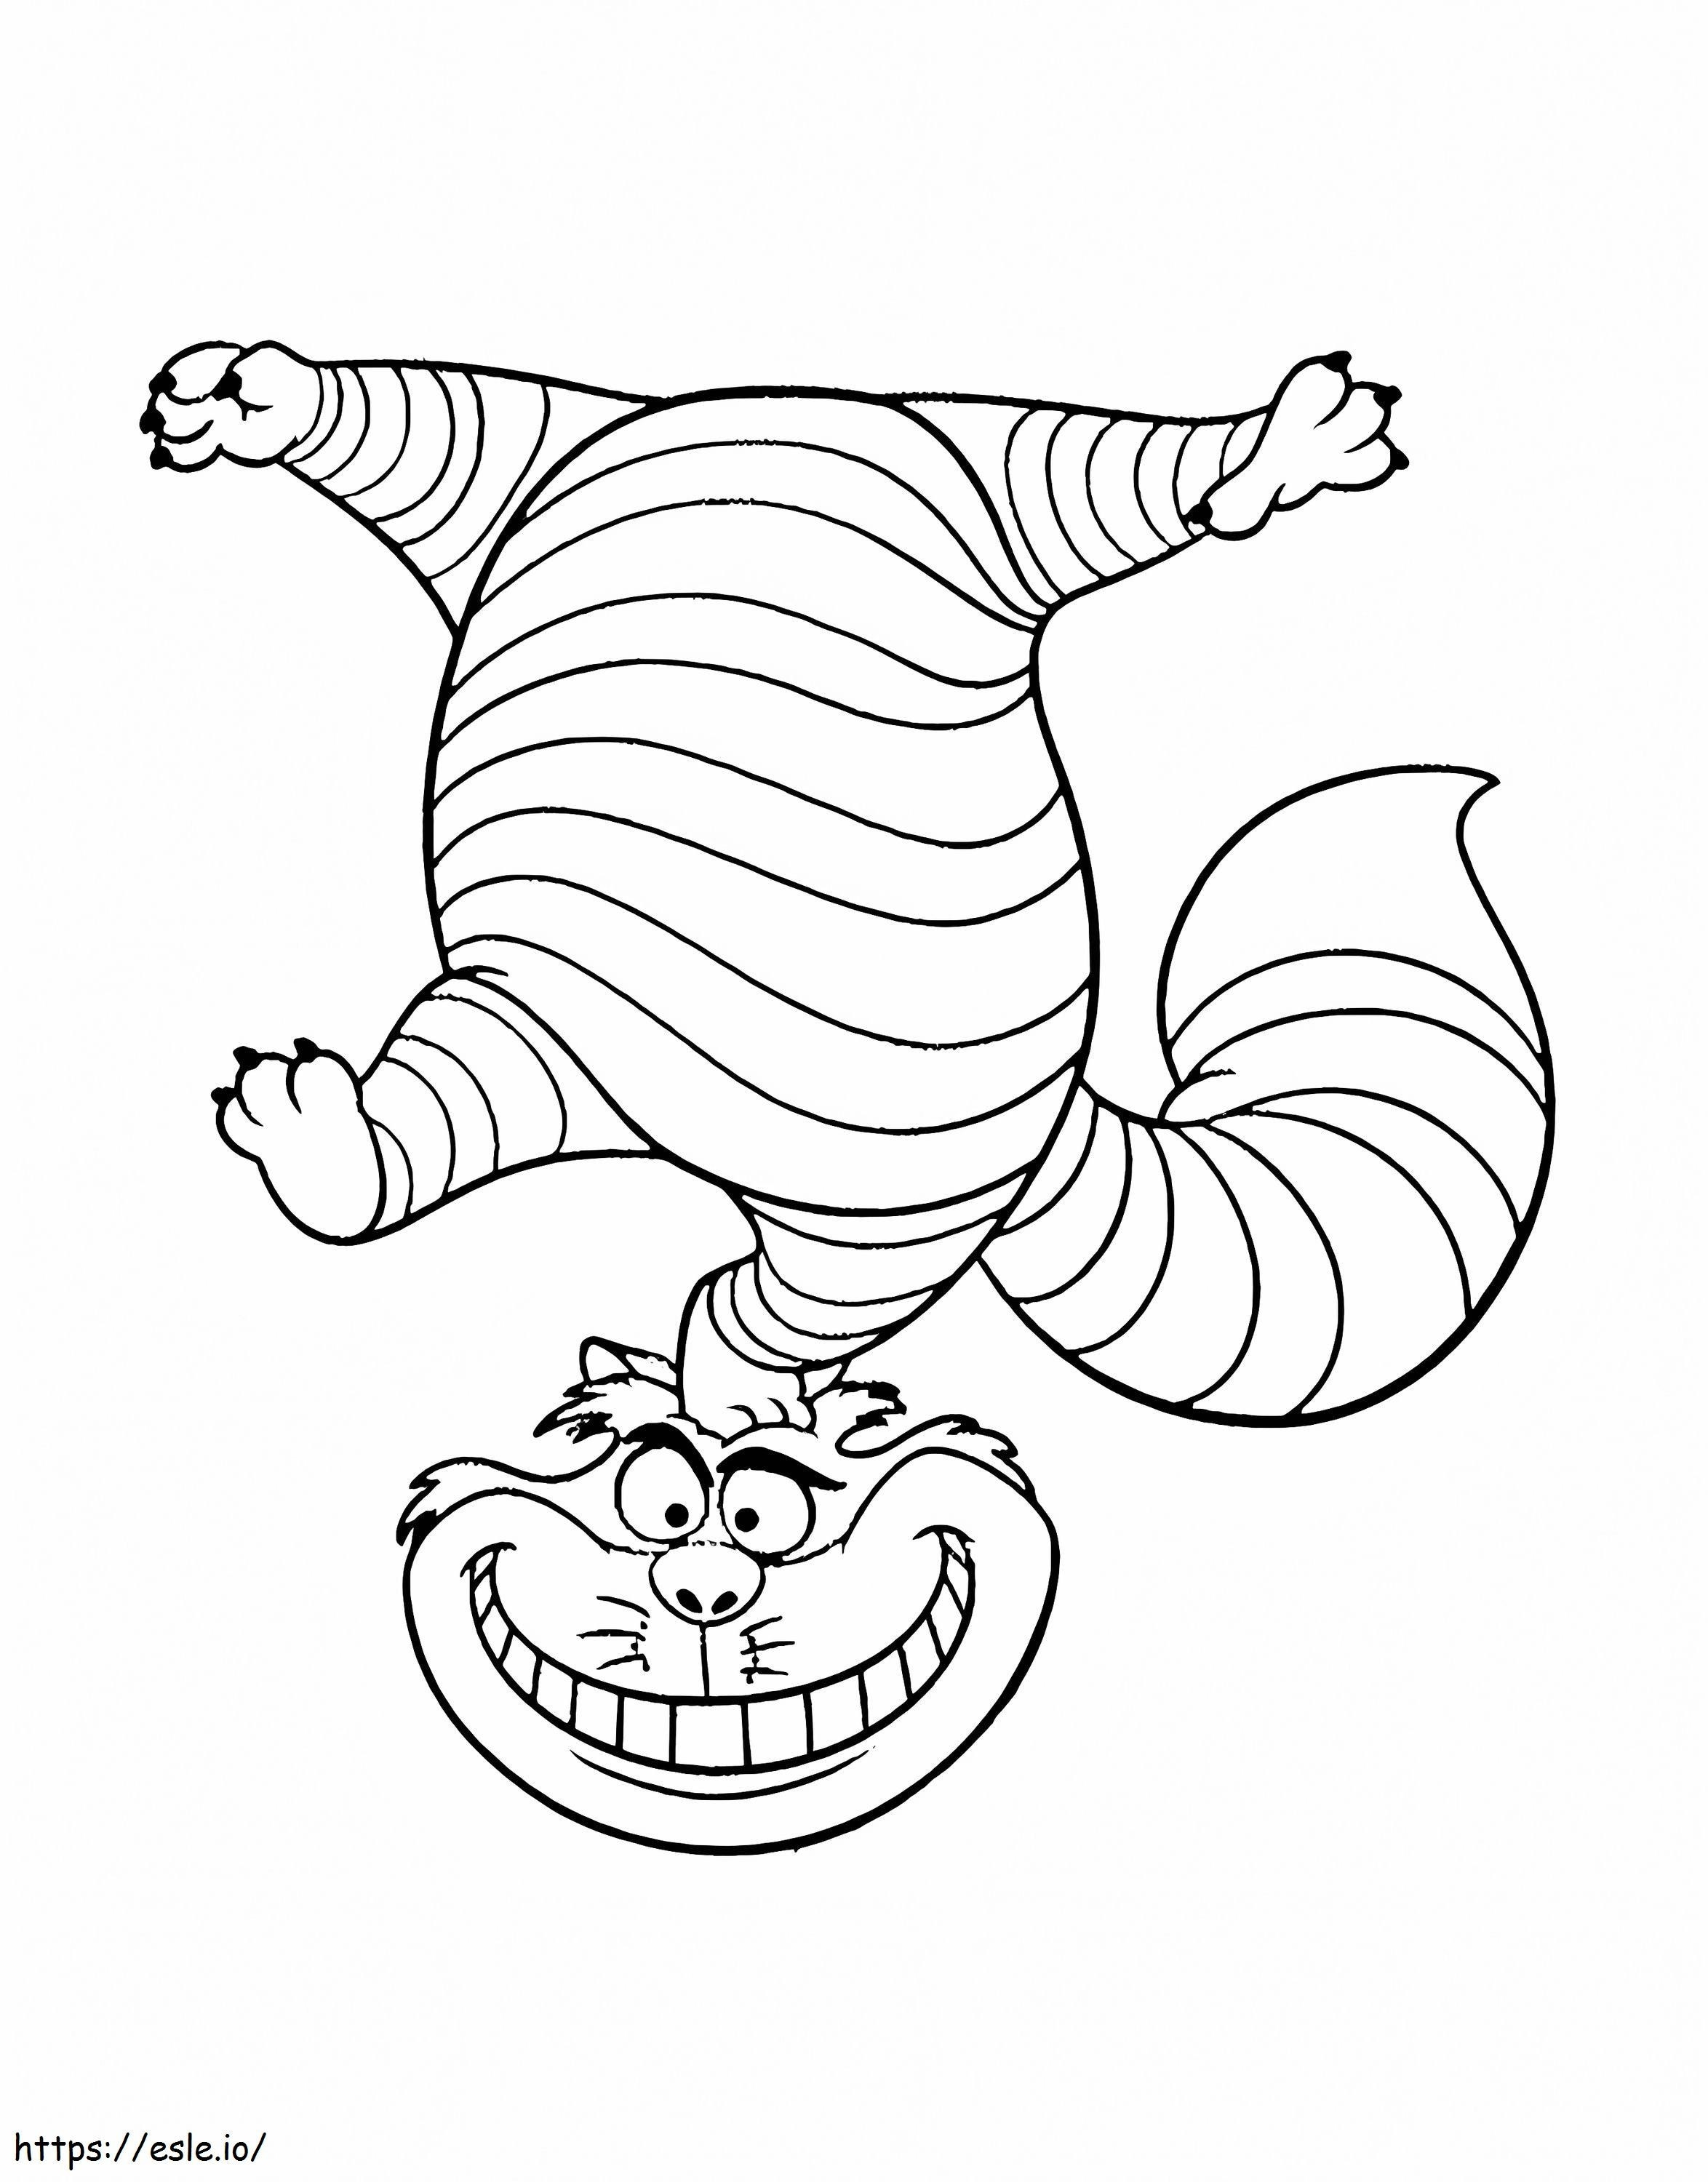 1545727632 Well Alice In Wonderland Free Printables 21 coloring page